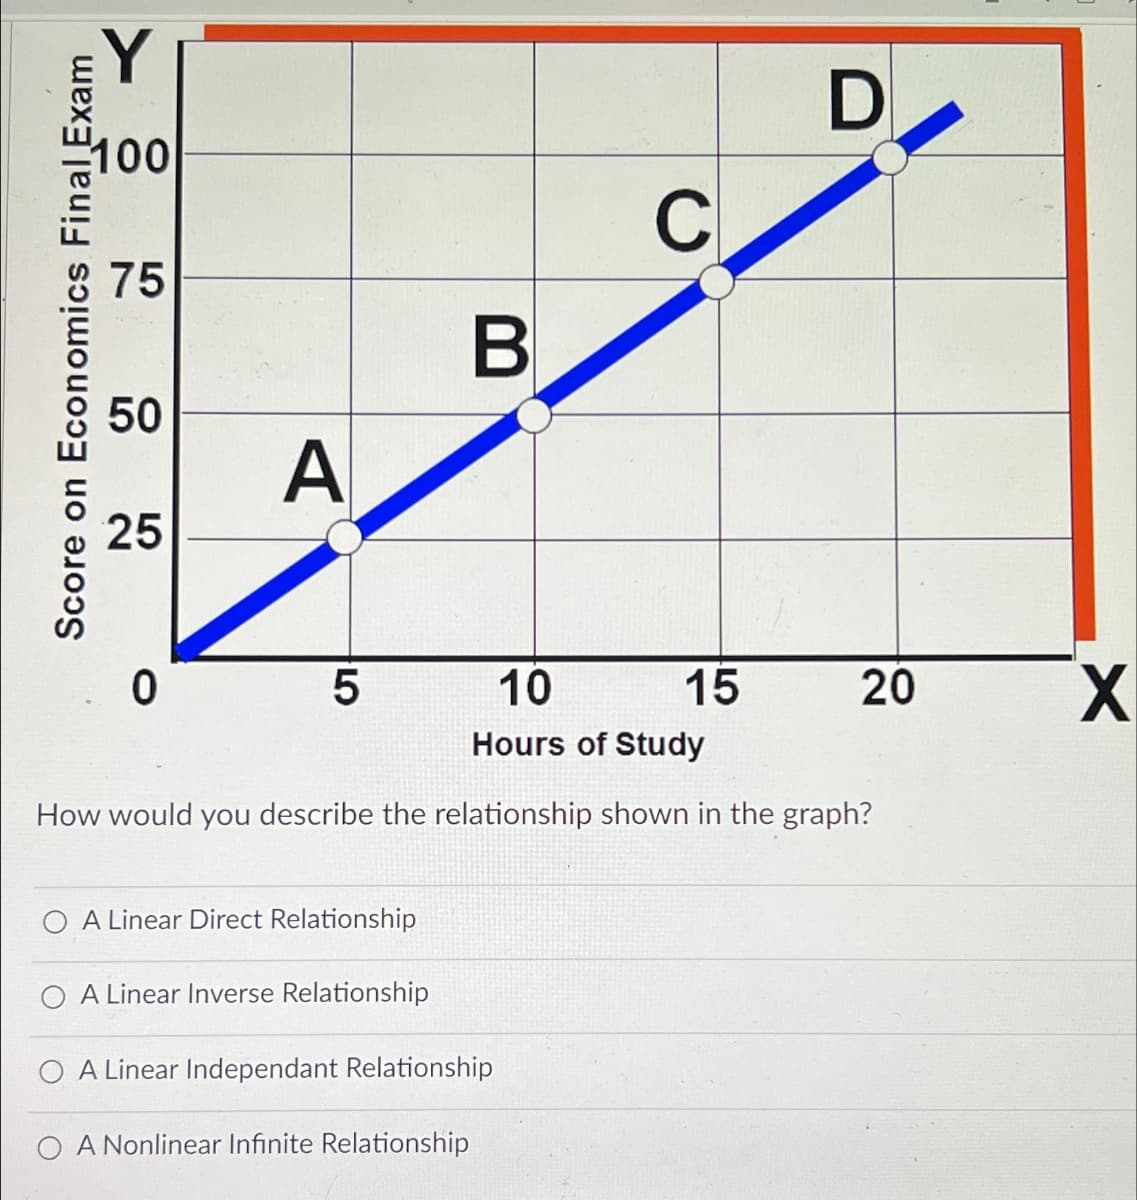 Y
Score on Economics Final Exam
100
75
50
25
A
0
5
10
Hours of Study
How would you describe the relationship shown in the graph?
A Linear Direct Relationship
B
A Linear Inverse Relationship
A Linear Independant Relationship
C
A Nonlinear Infinite Relationship
D
15
20
X